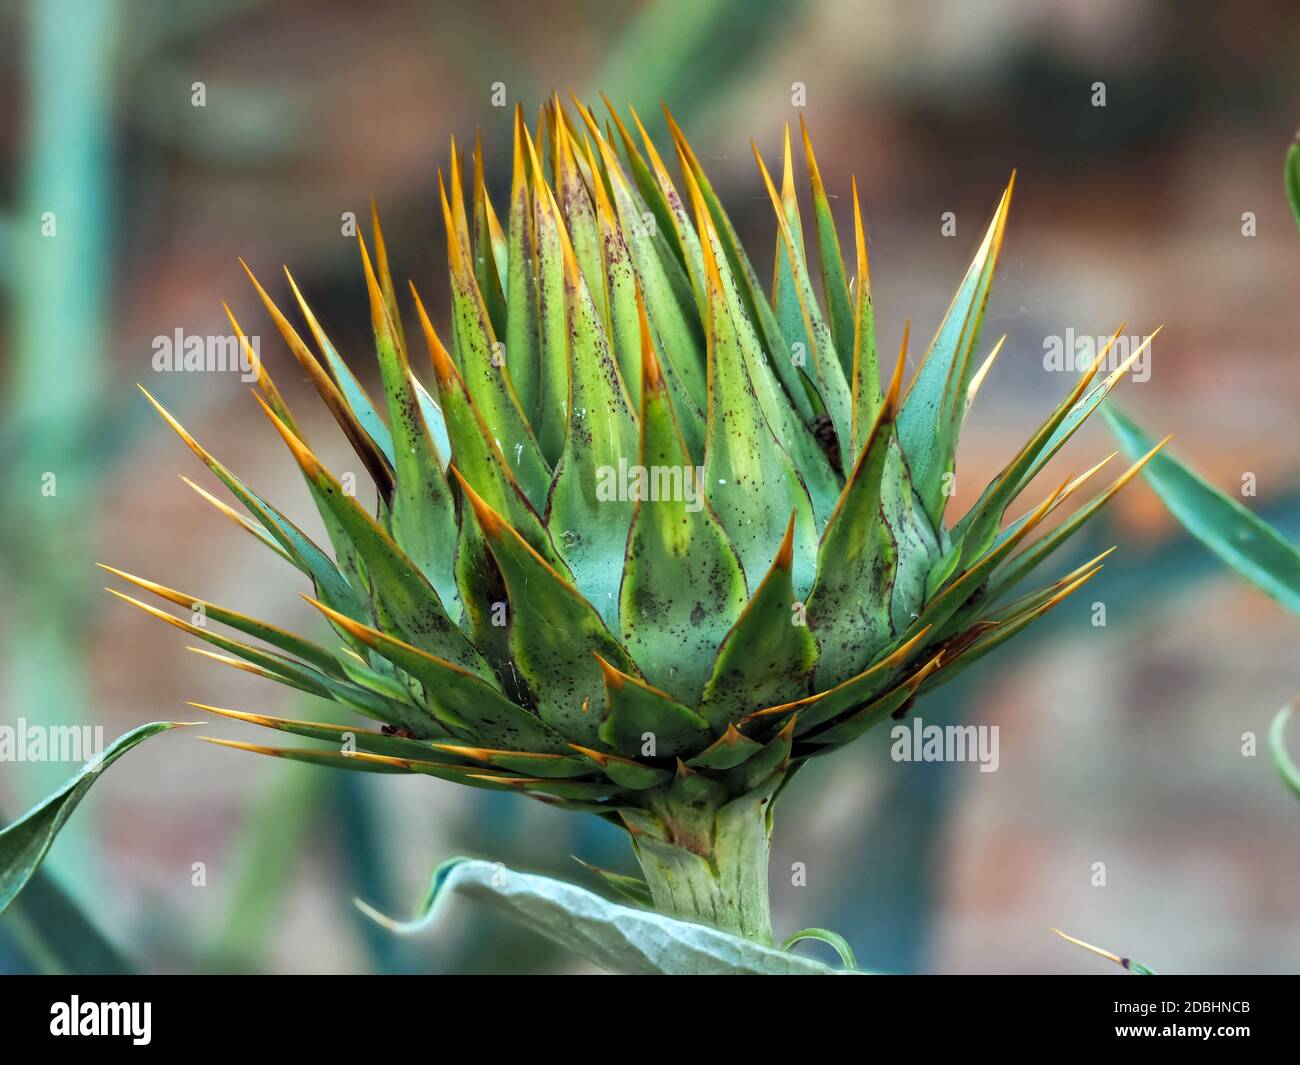 Closeup of a green bud with orange spines of the cardoon or artichoke thistle, Cynara cardunculus Stock Photo